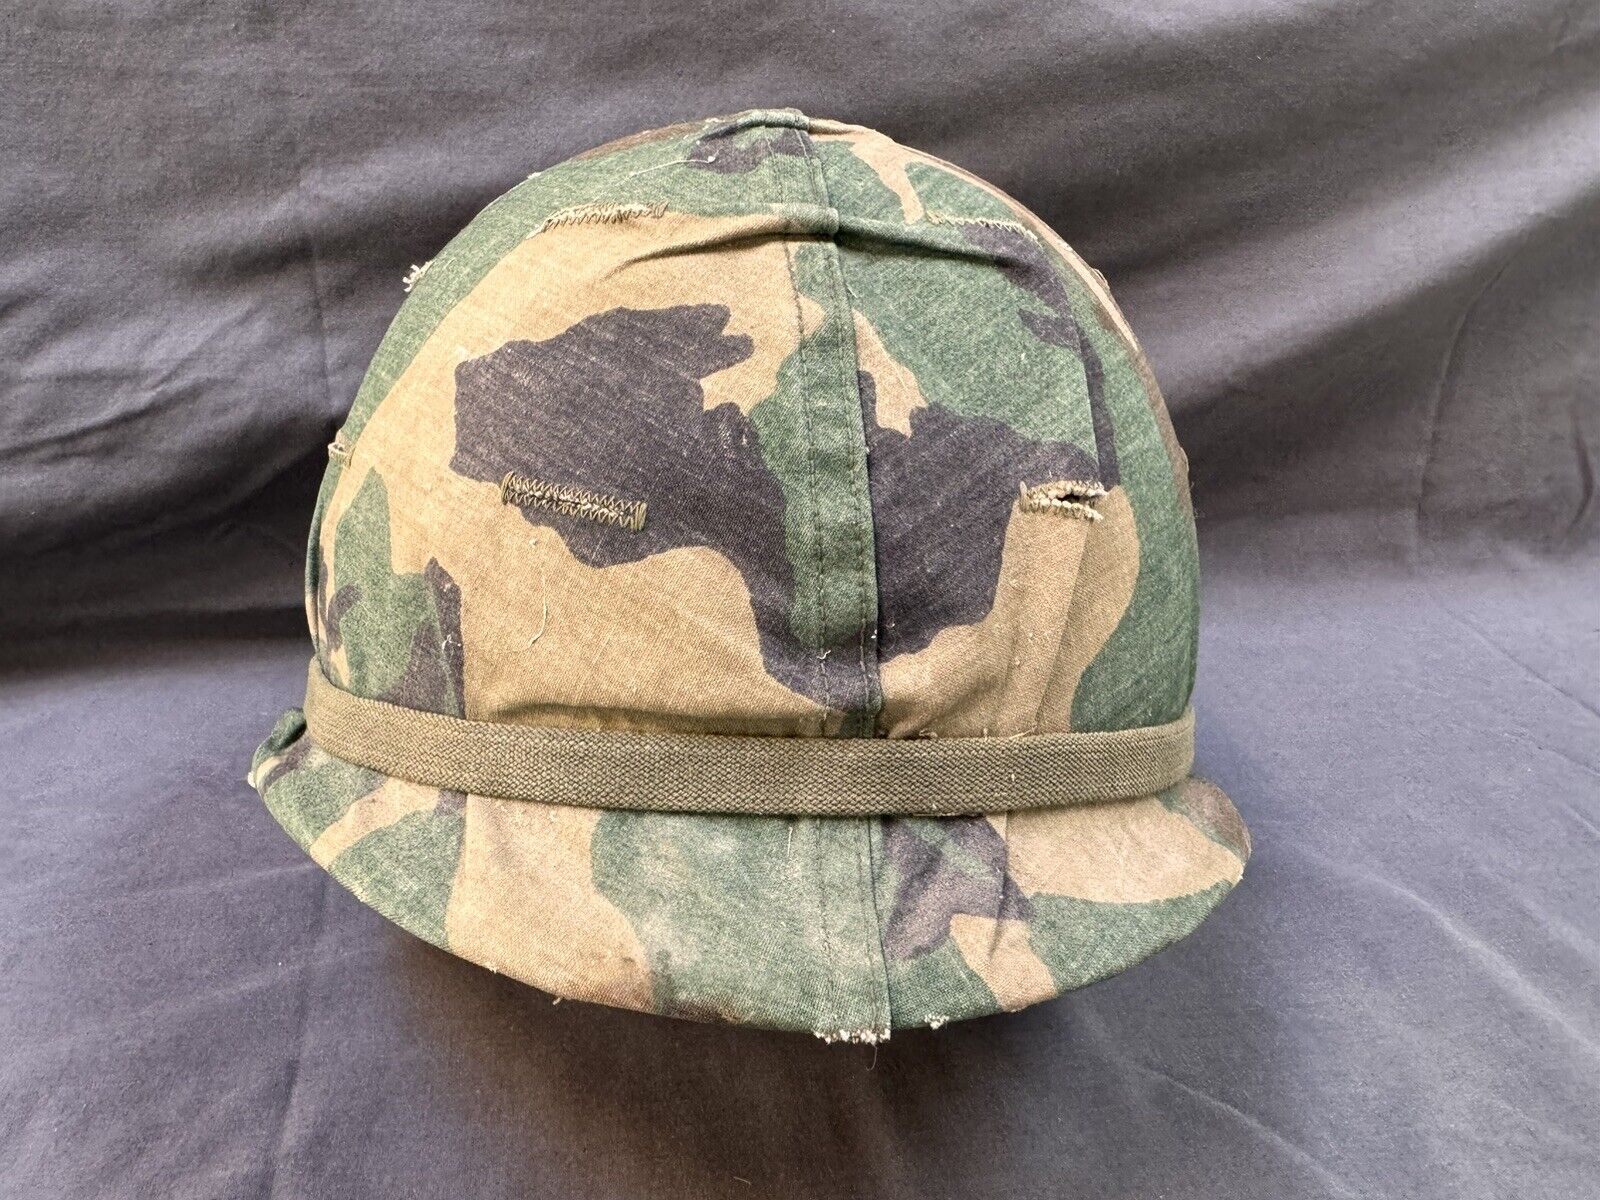 U.S. Army M1 Helmet with Liner Camouflage Cover 2 Helmet System Ships Same Day